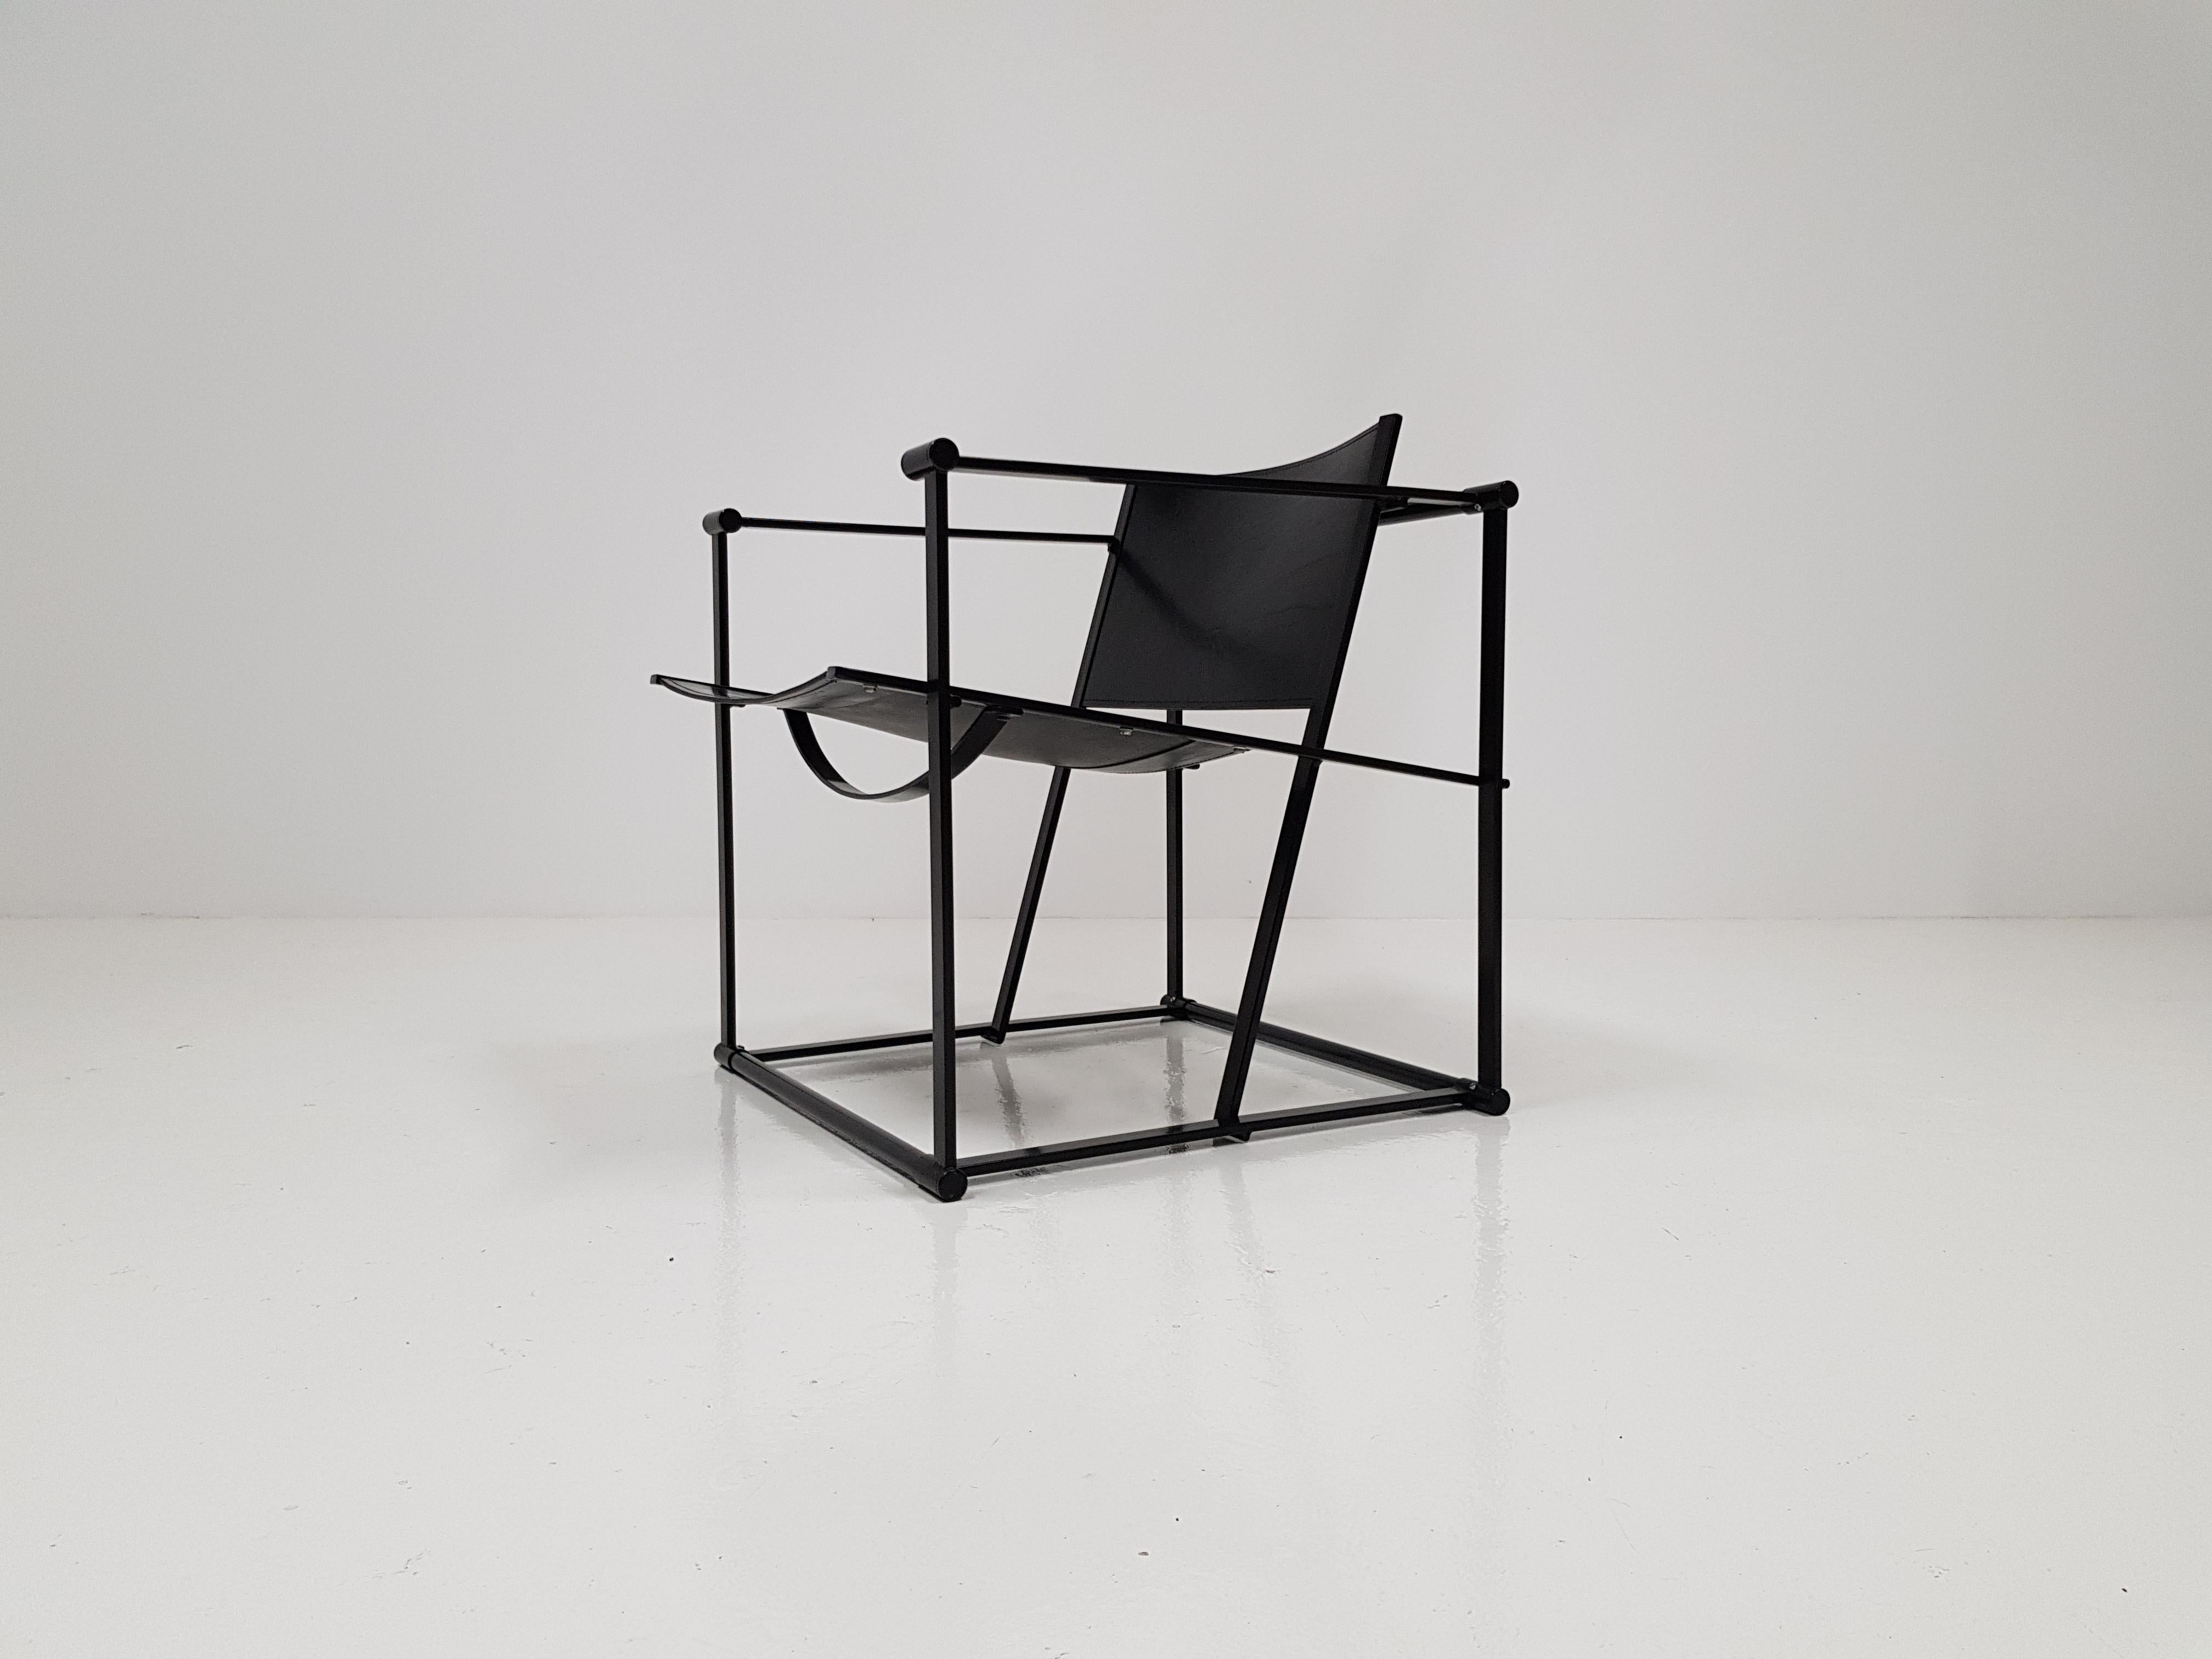 A steel and leather FM62 chair by Radboud Van Beekum for Pastoe, Netherlands, 1980s.

Constructed from geometrically folded steel with bent ply seating. Inspired by the designs of Gerrit Rietveld and following the traditions of the De Stijl